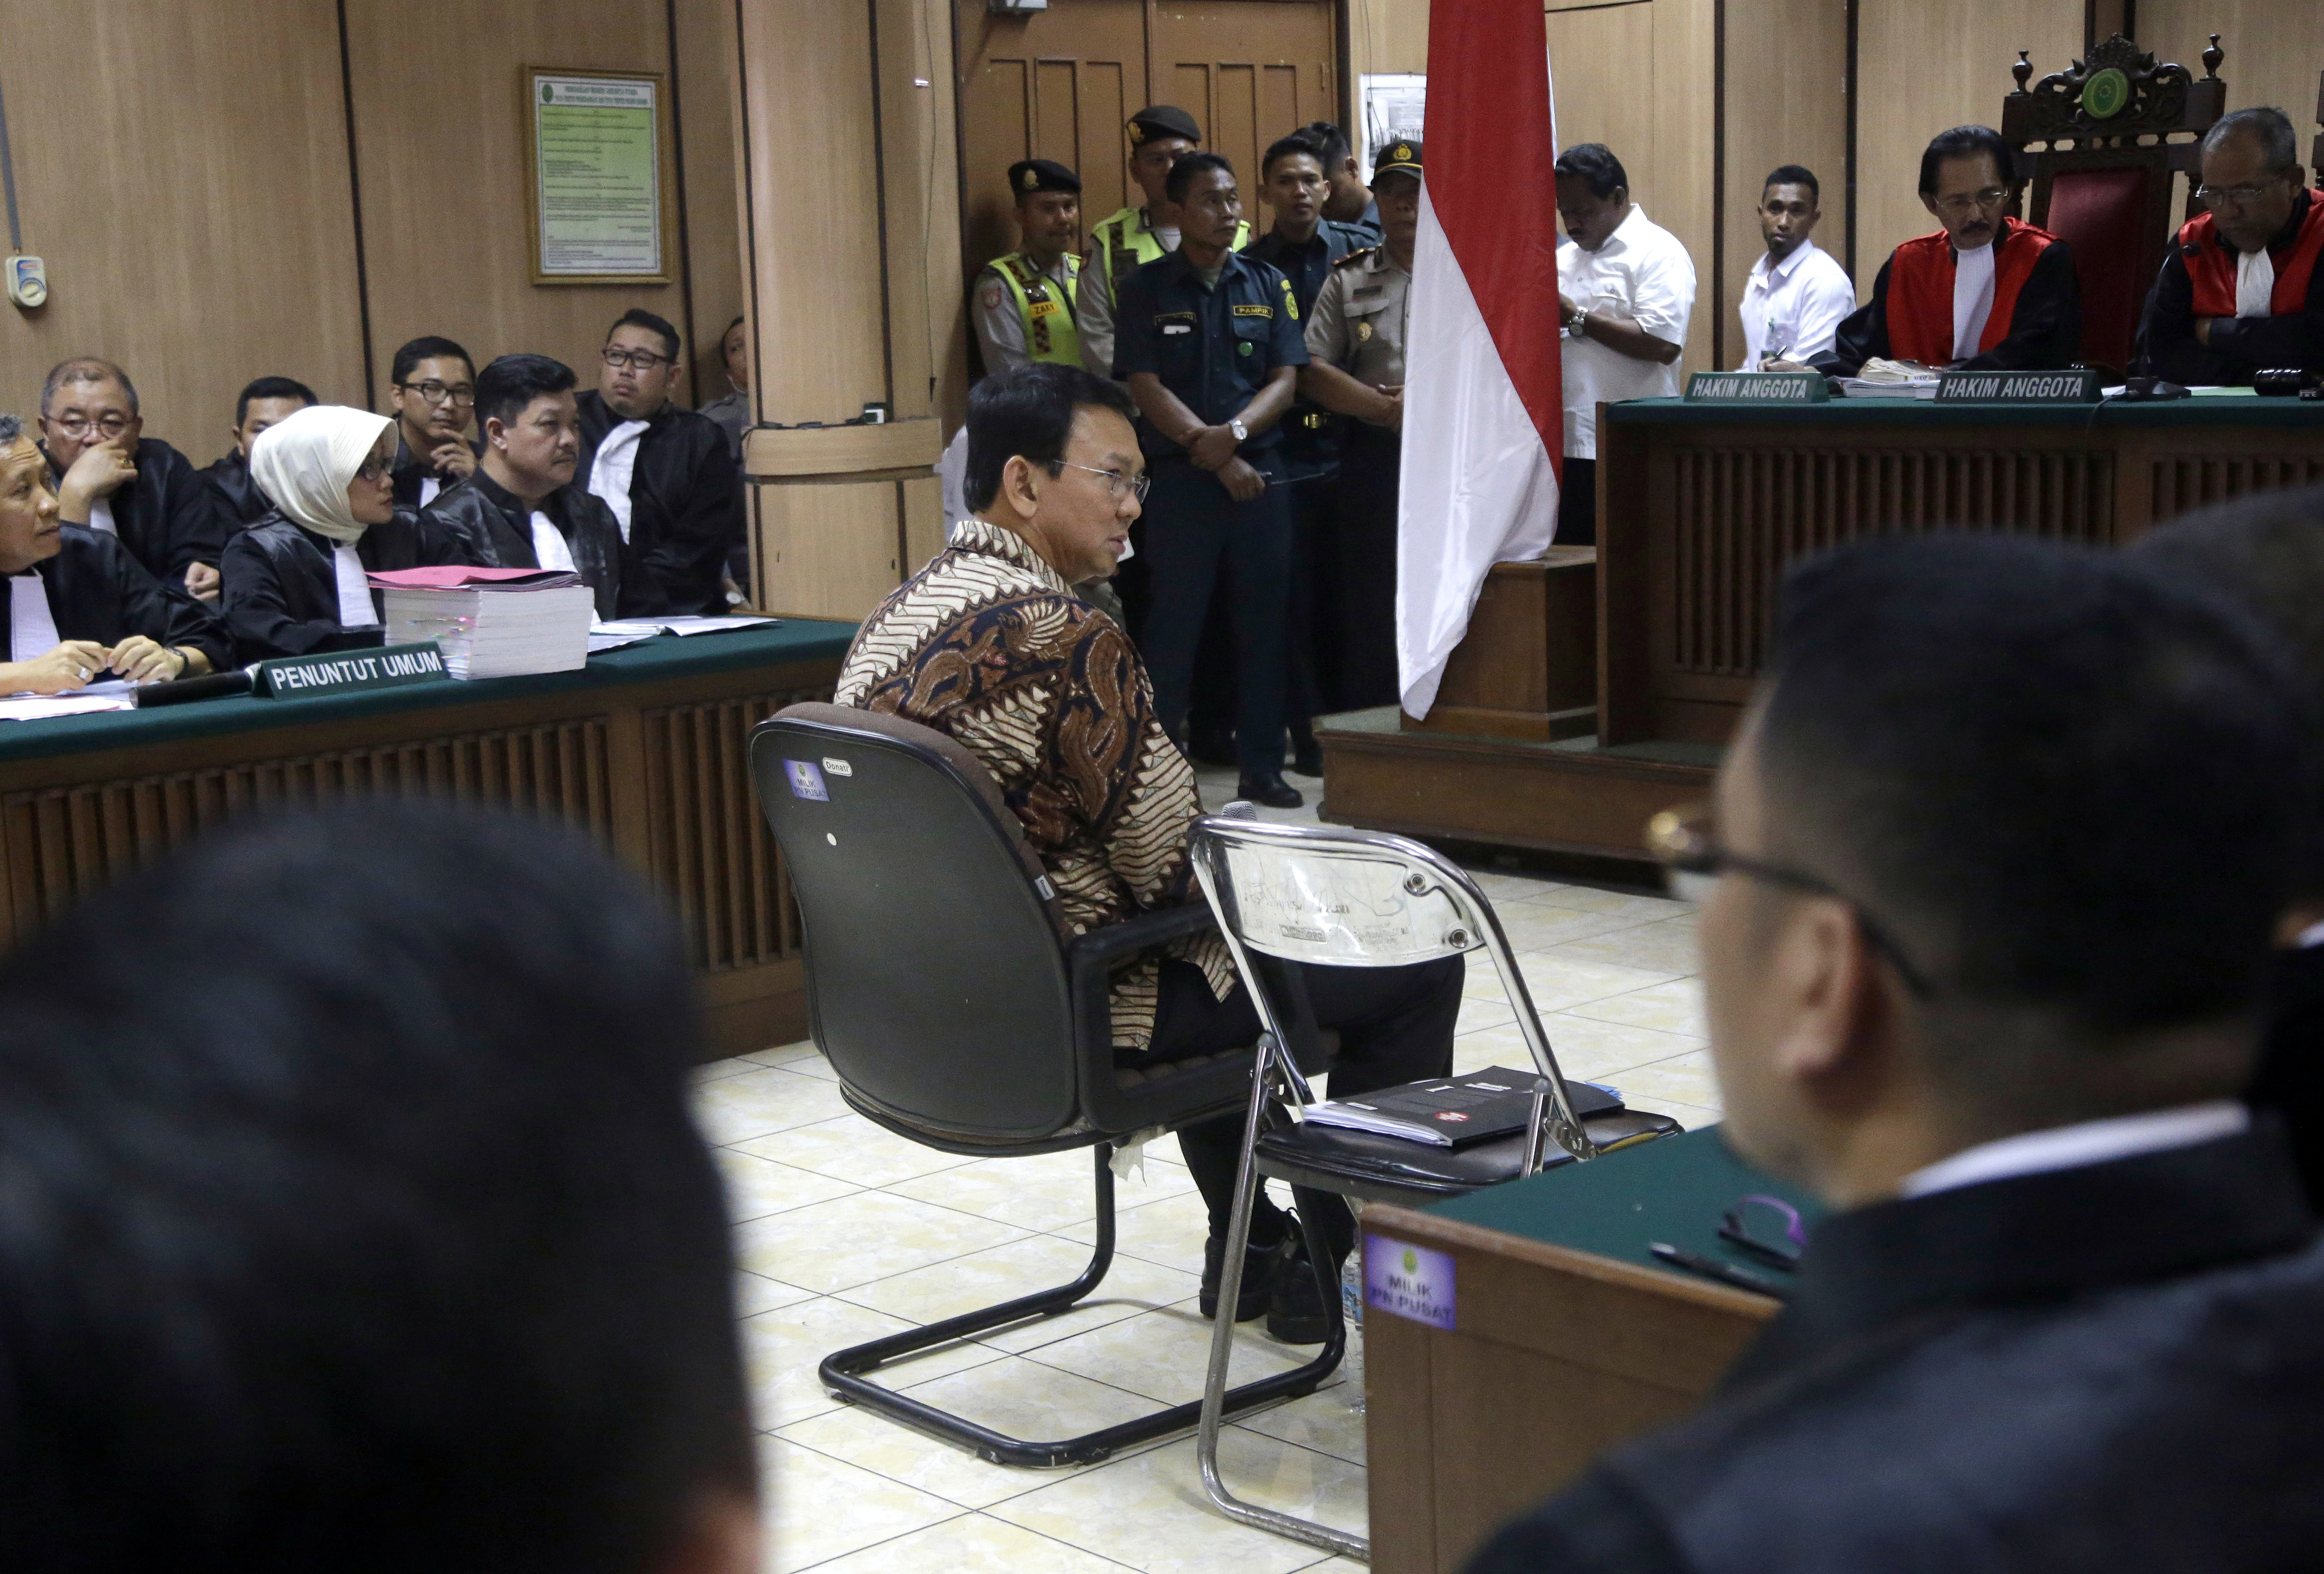 Jakarta Governor Basuki Tjahaja Purnama, popularly known as Ahok, center, sits on the defendant's chair at the start of his trial hearing at North Jakarta District Court in Jakarta on Dec. 13, 2016. Ahok is on trial on accusation of blasphemy following his remark about a passage in the Quran that could be interpreted as prohibiting Muslims from accepting non-Muslims as leaders (Tatan Syuflana—AP)